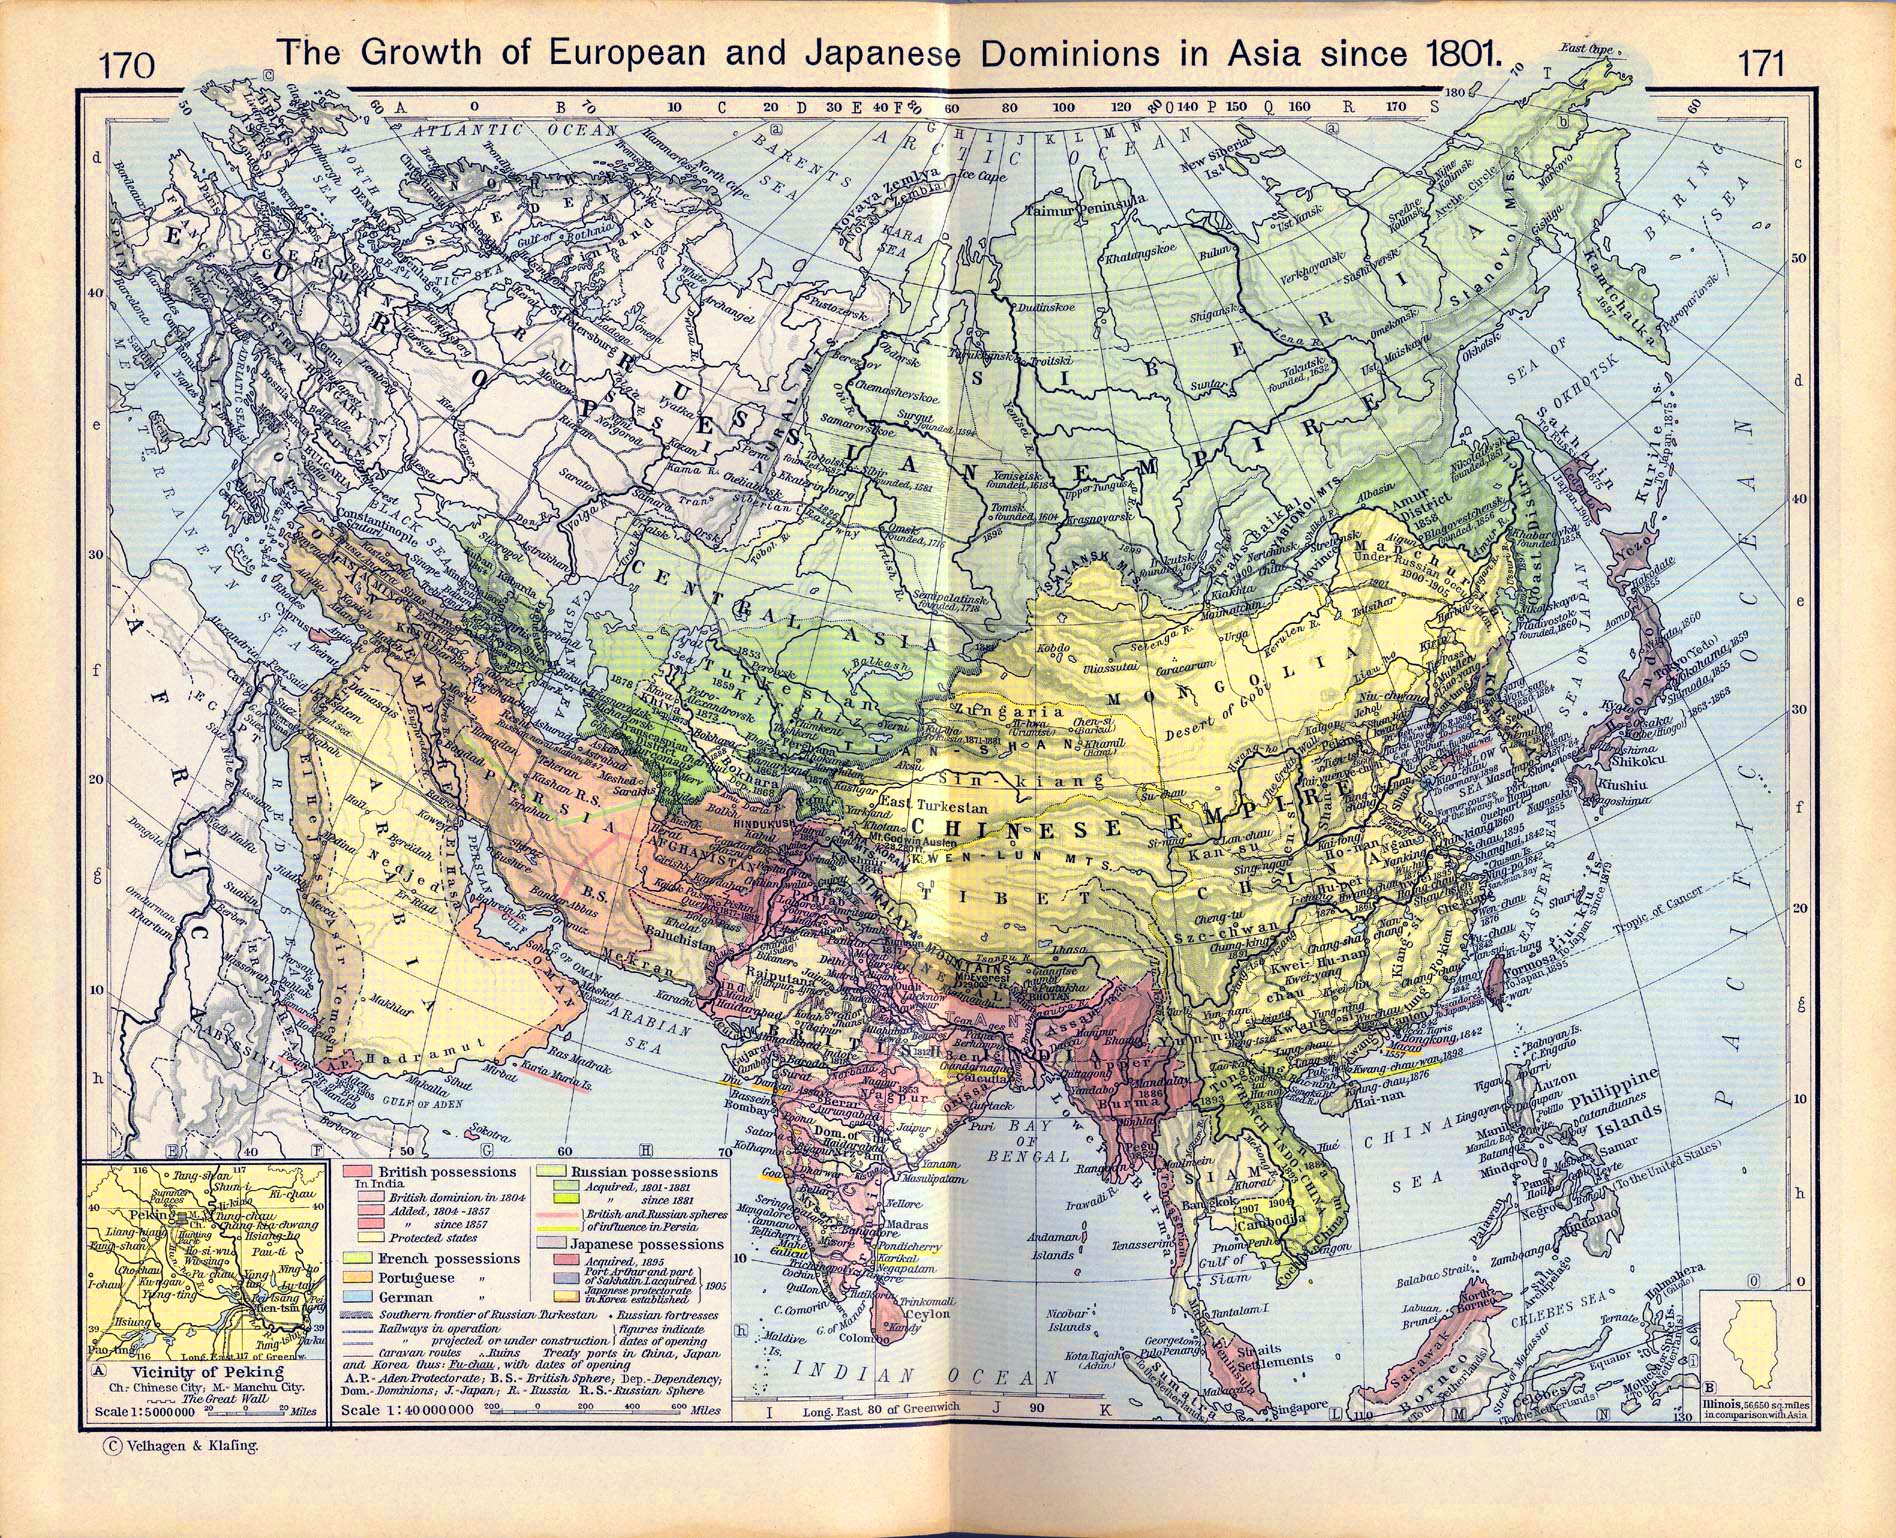 Map of European and Japanese dominions in Asia since 1801